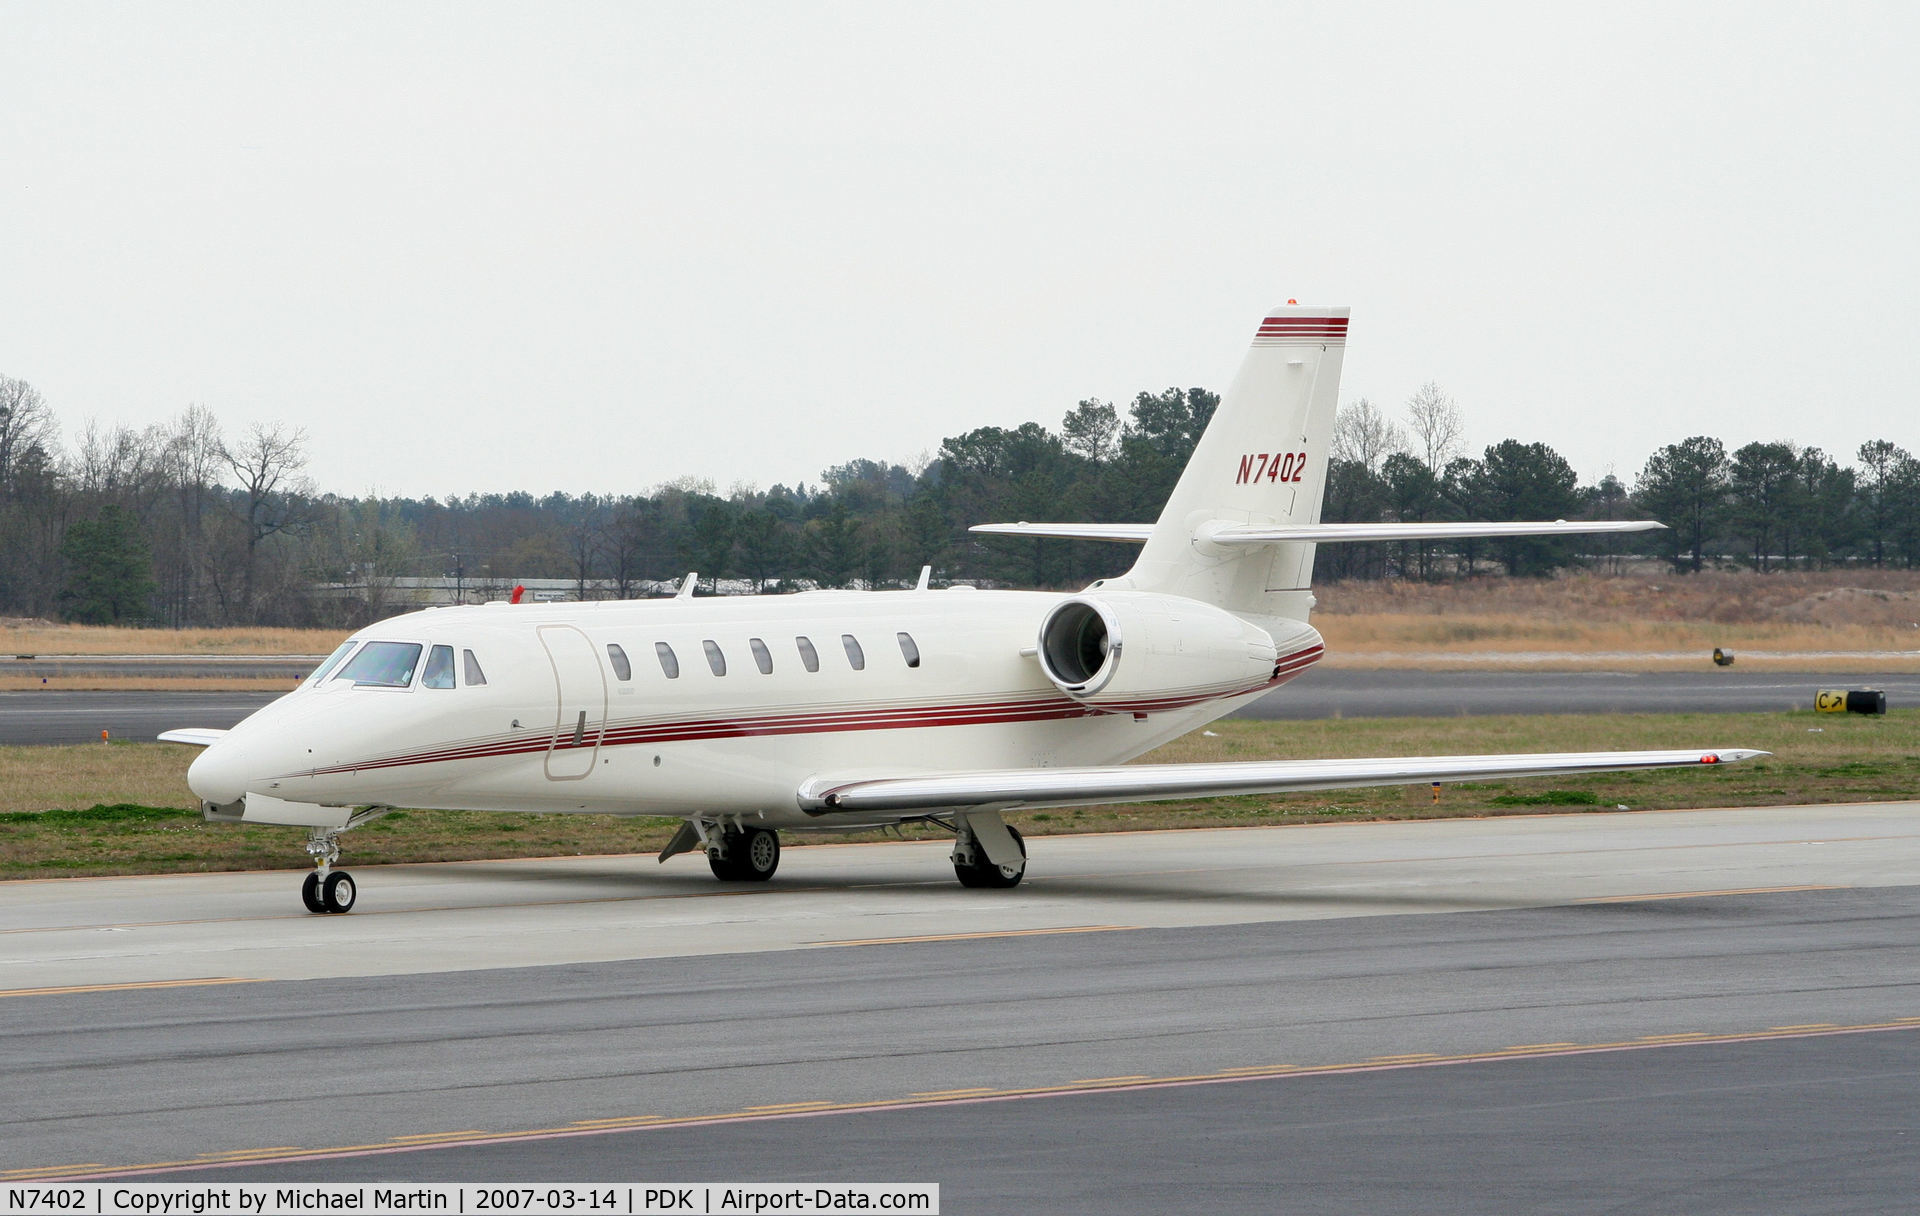 N7402, 2006 Cessna 680 Citation Sovereign C/N 680-0082, Taxing to Jet Fueling